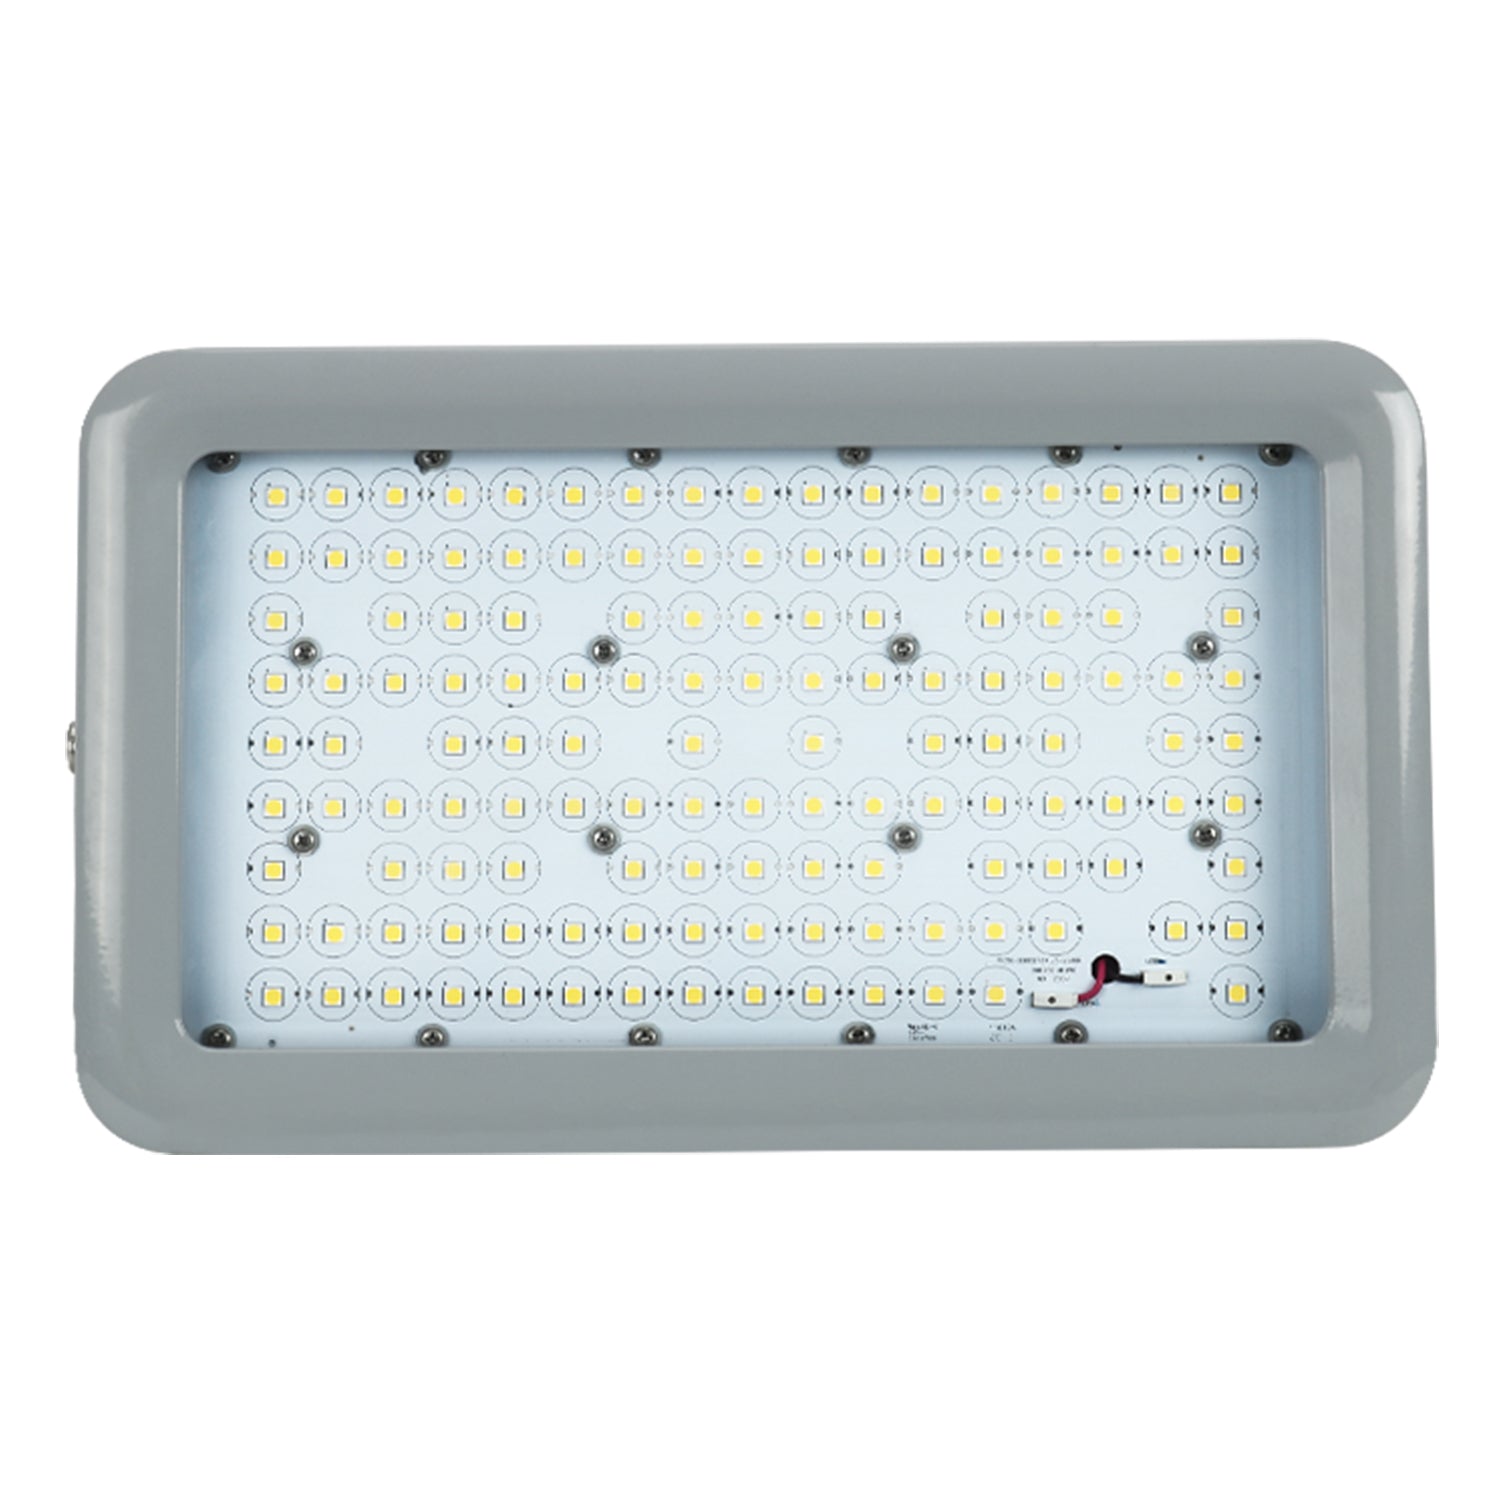 100W LED Explosion-Proof Flood Light for Hazardous Locations - Dimmable, 5000K, 13500LM, IP66 Rated, Flexible and Reliable